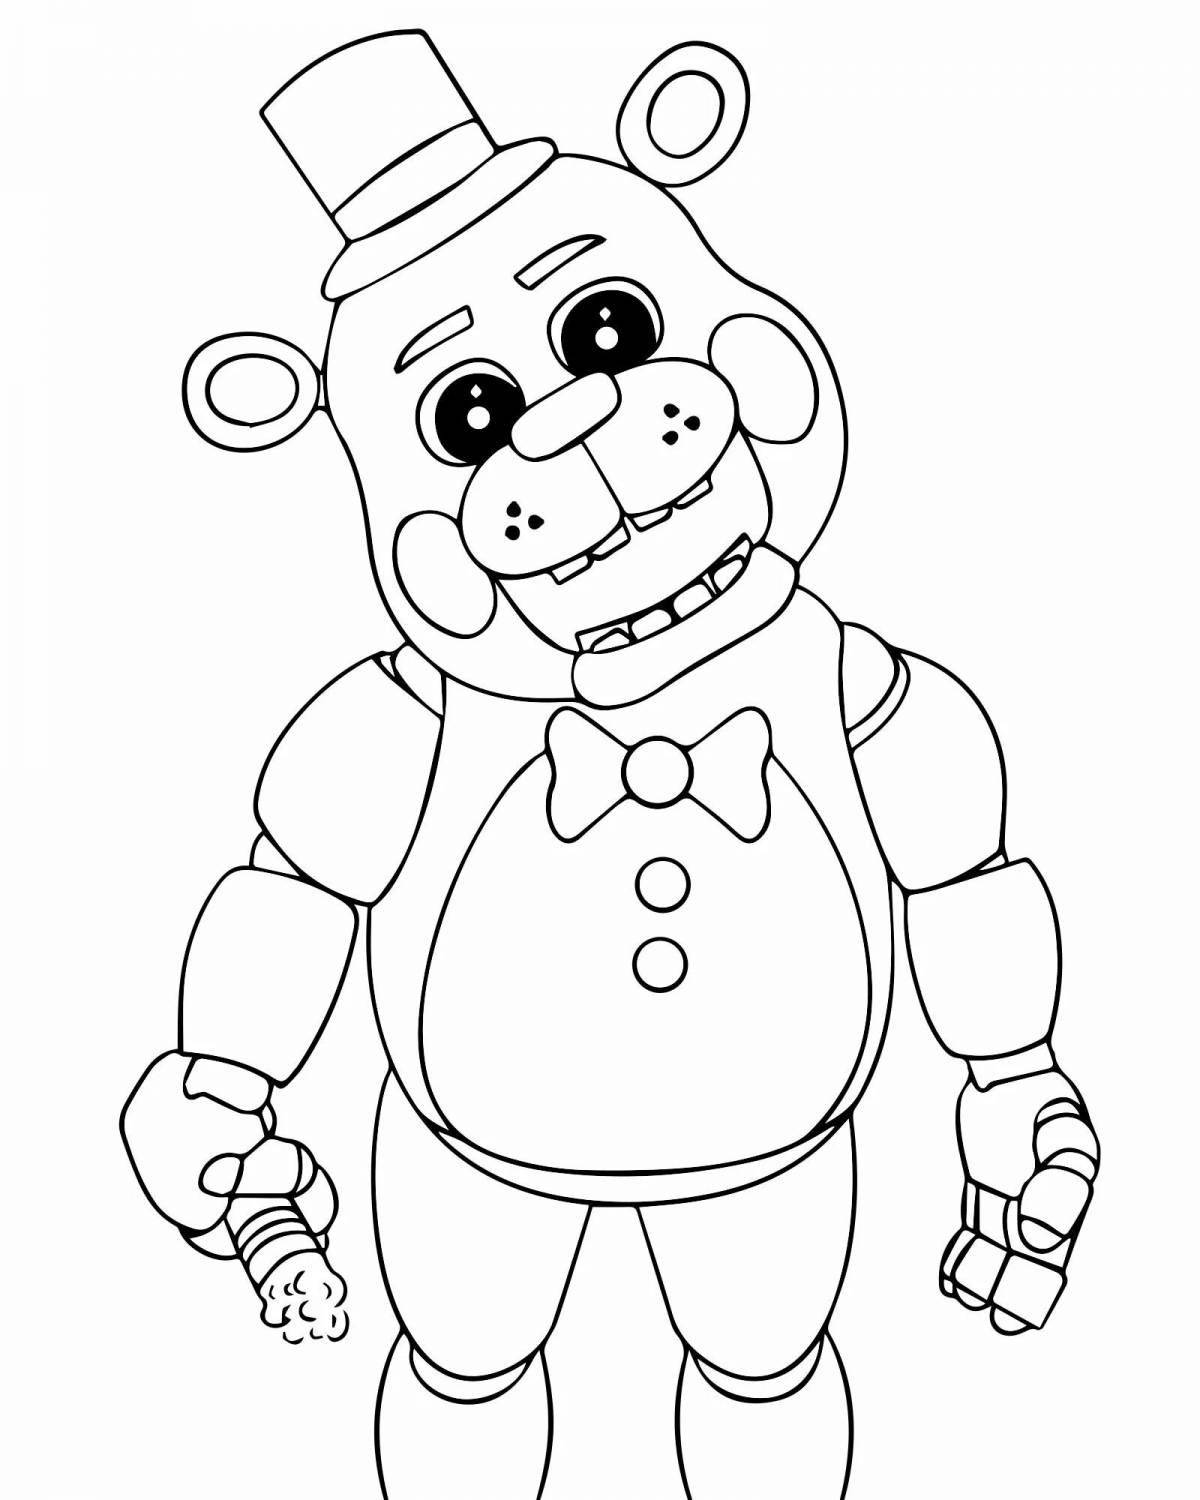 A fun fnaf coloring book for kids